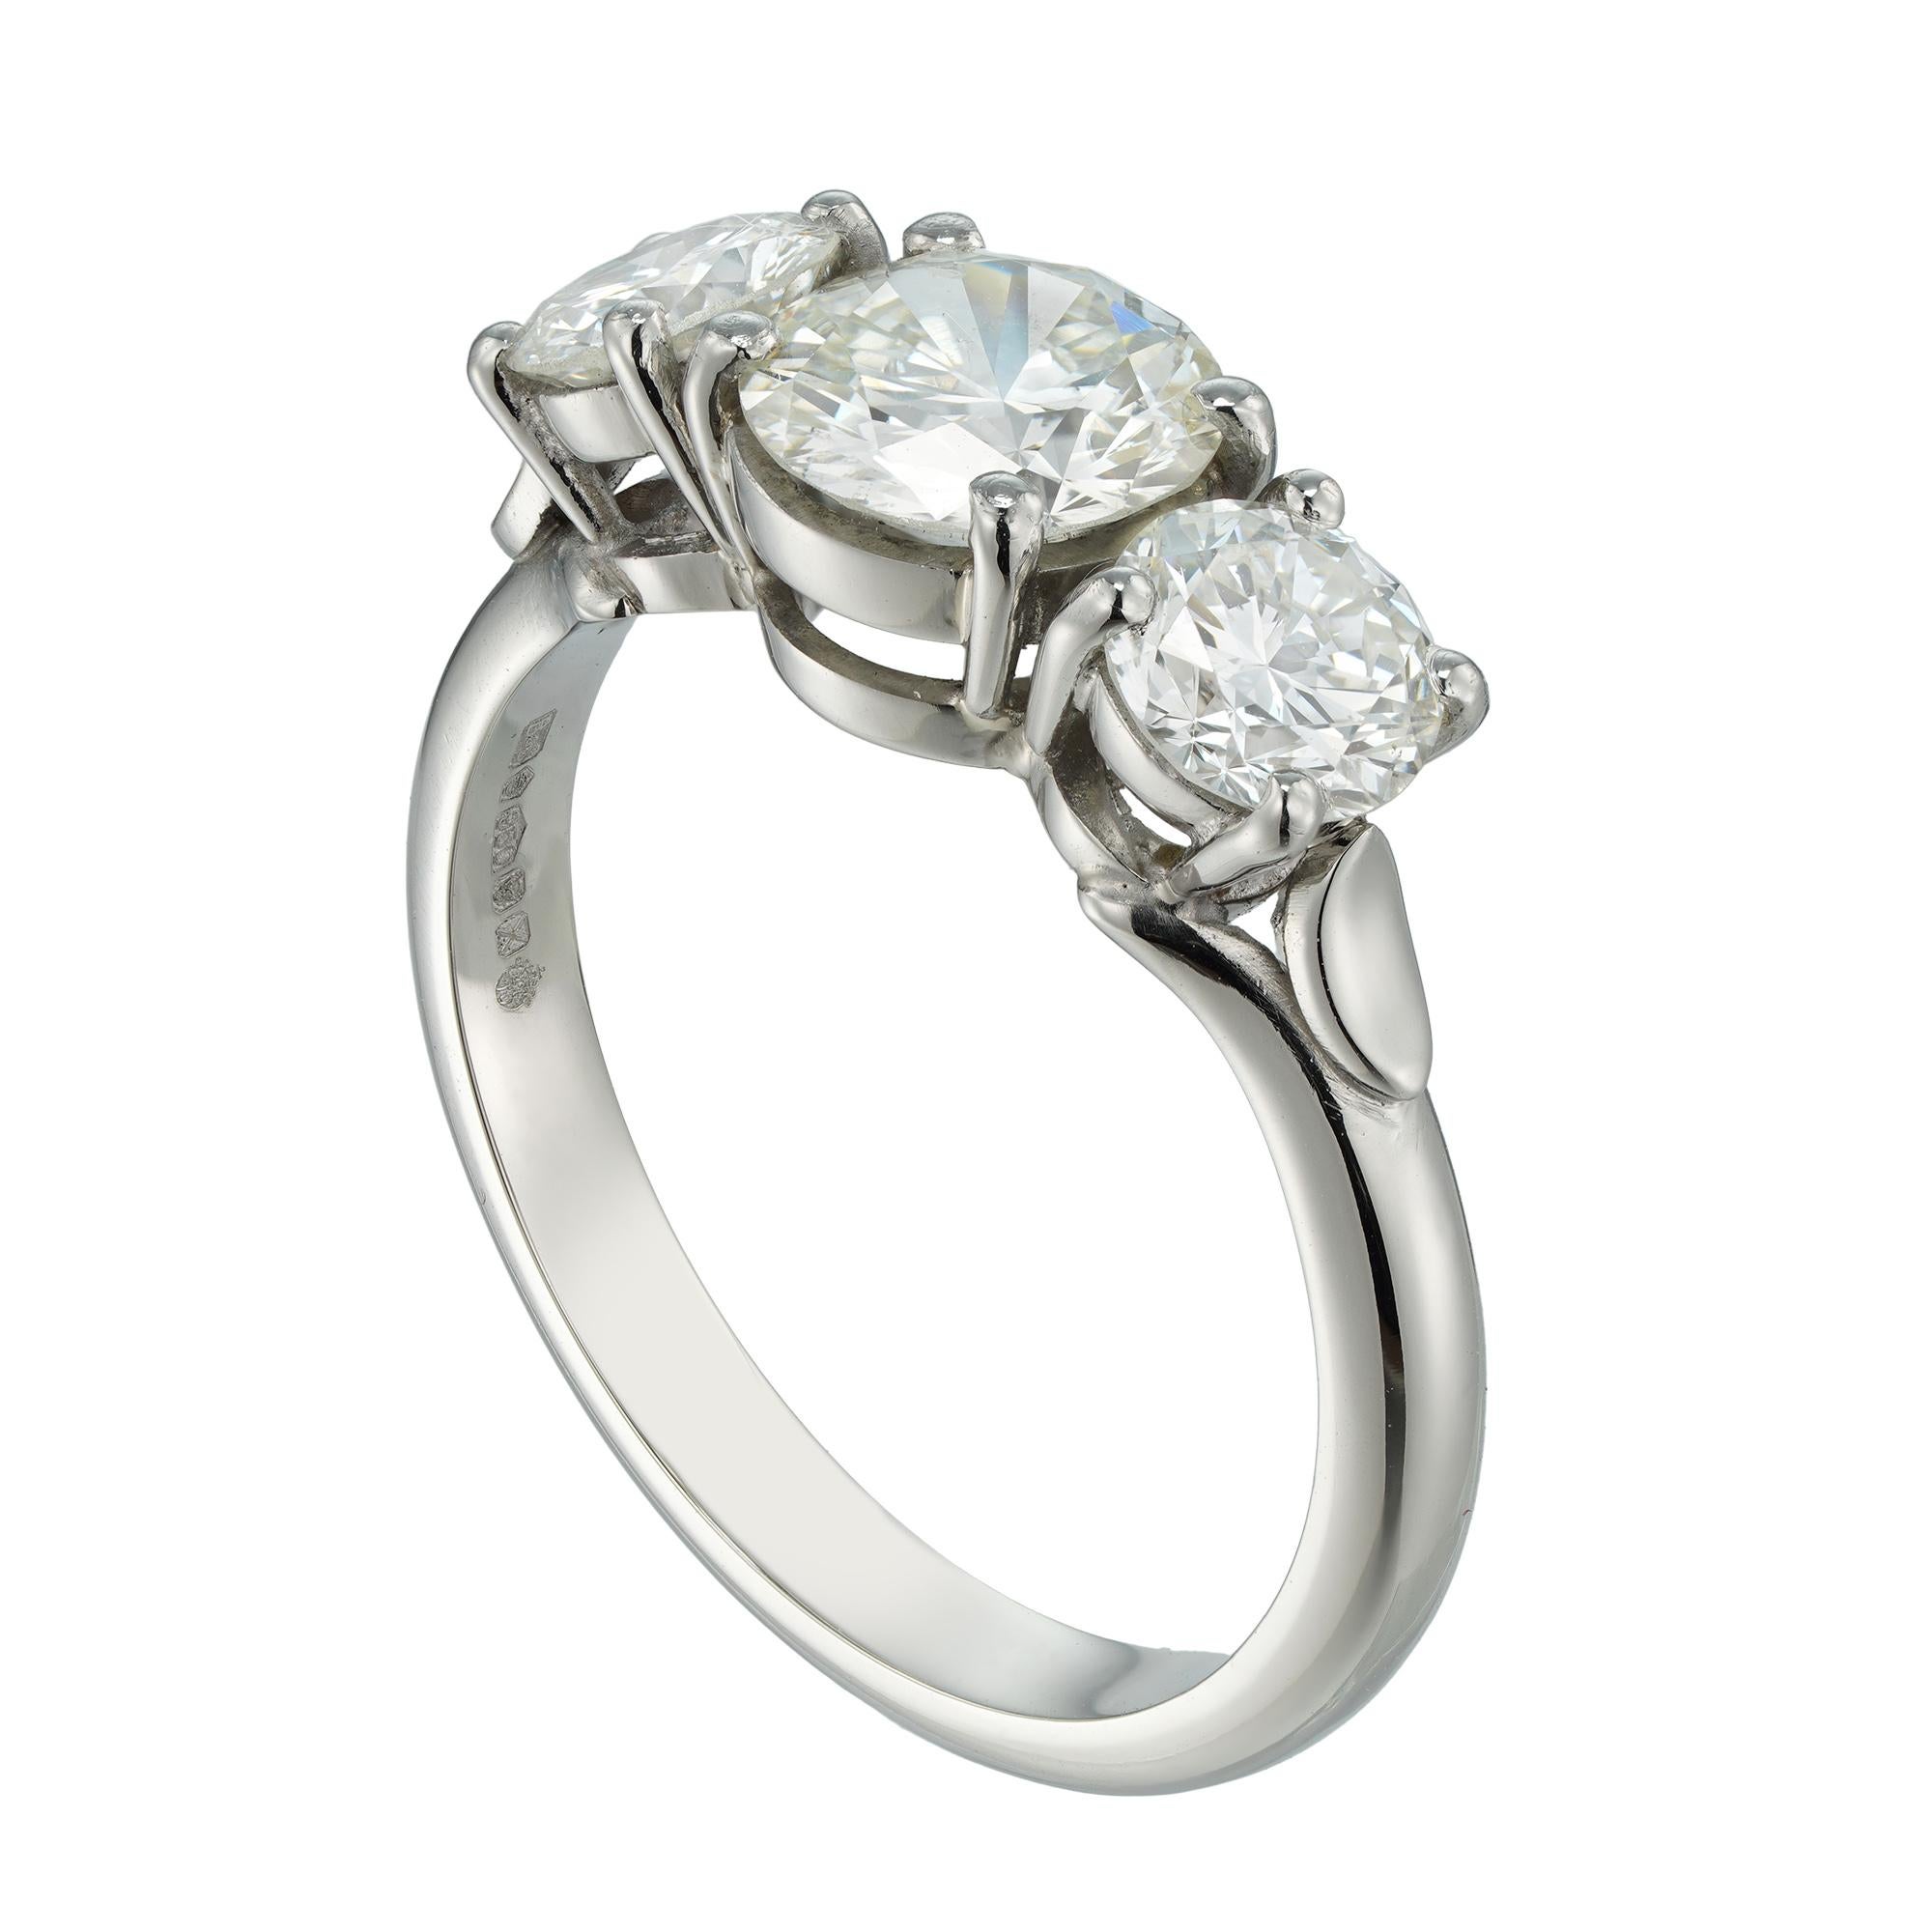 3 stone diamond ring meaning